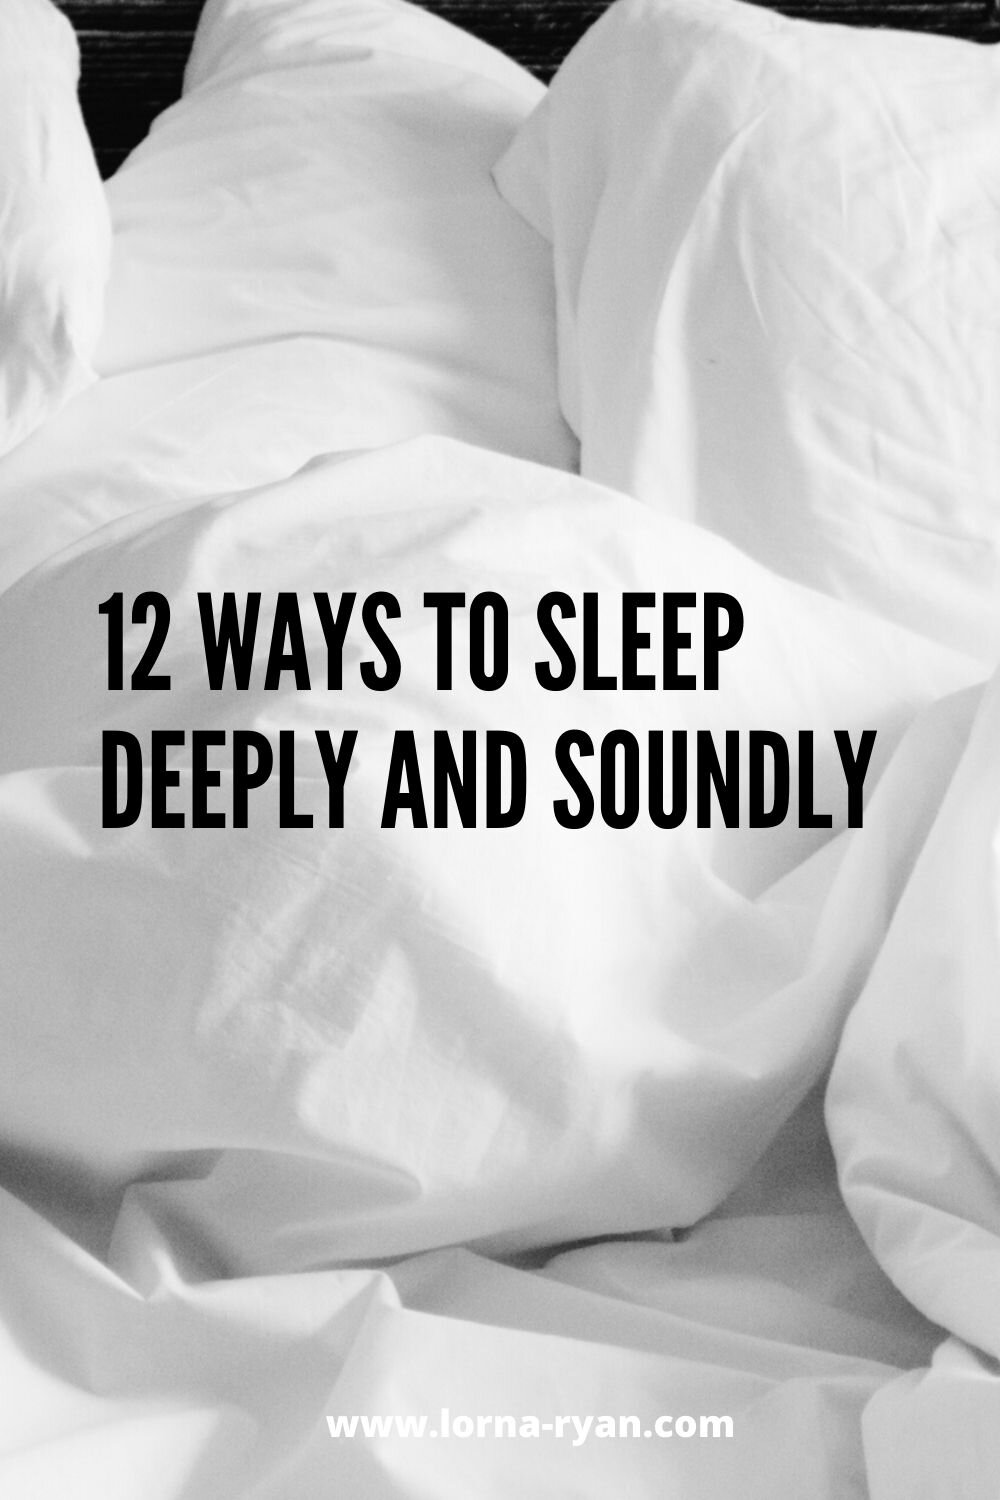 If you're groggy throughout the day, it might be because you're not getting good sleep. Quality snooze time is important because it sets the pace for the rest